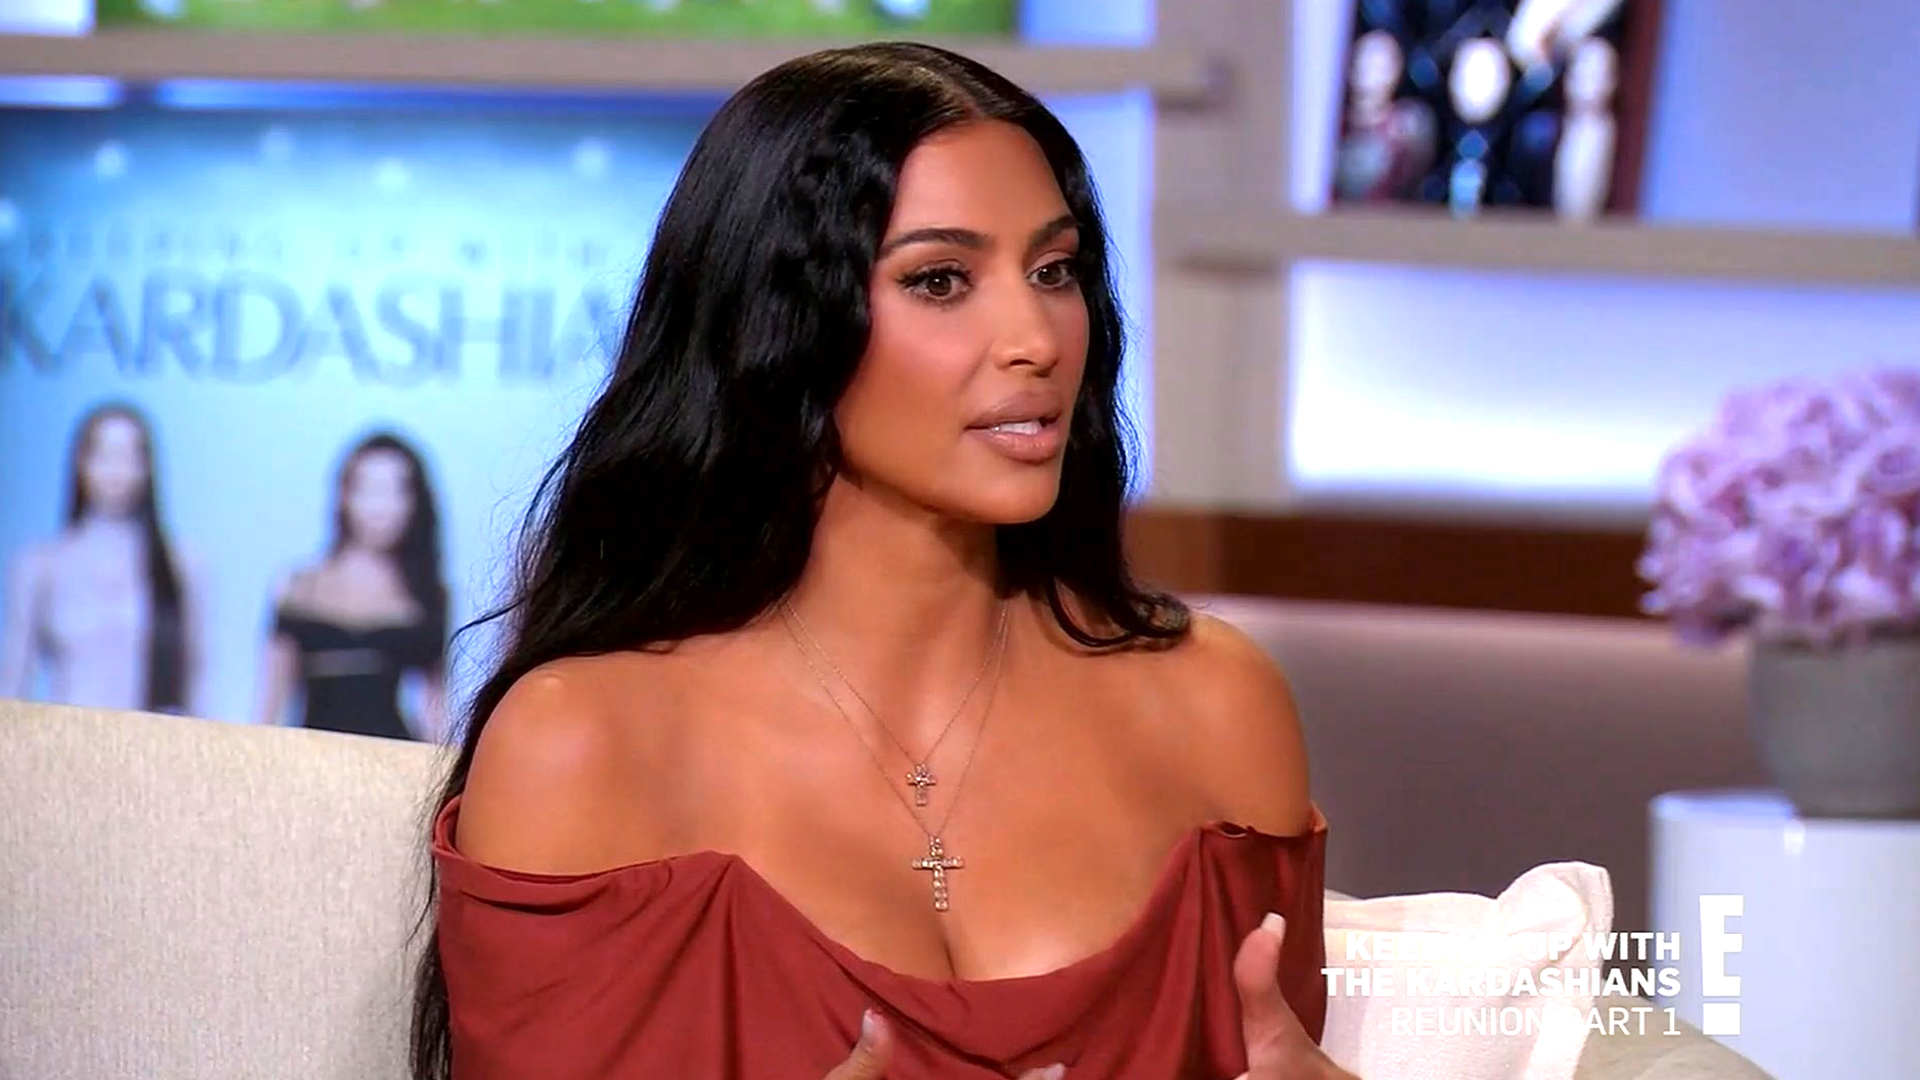 Kim Kardashian opens up about infamous sex tape The one thing that I wish didnt exist